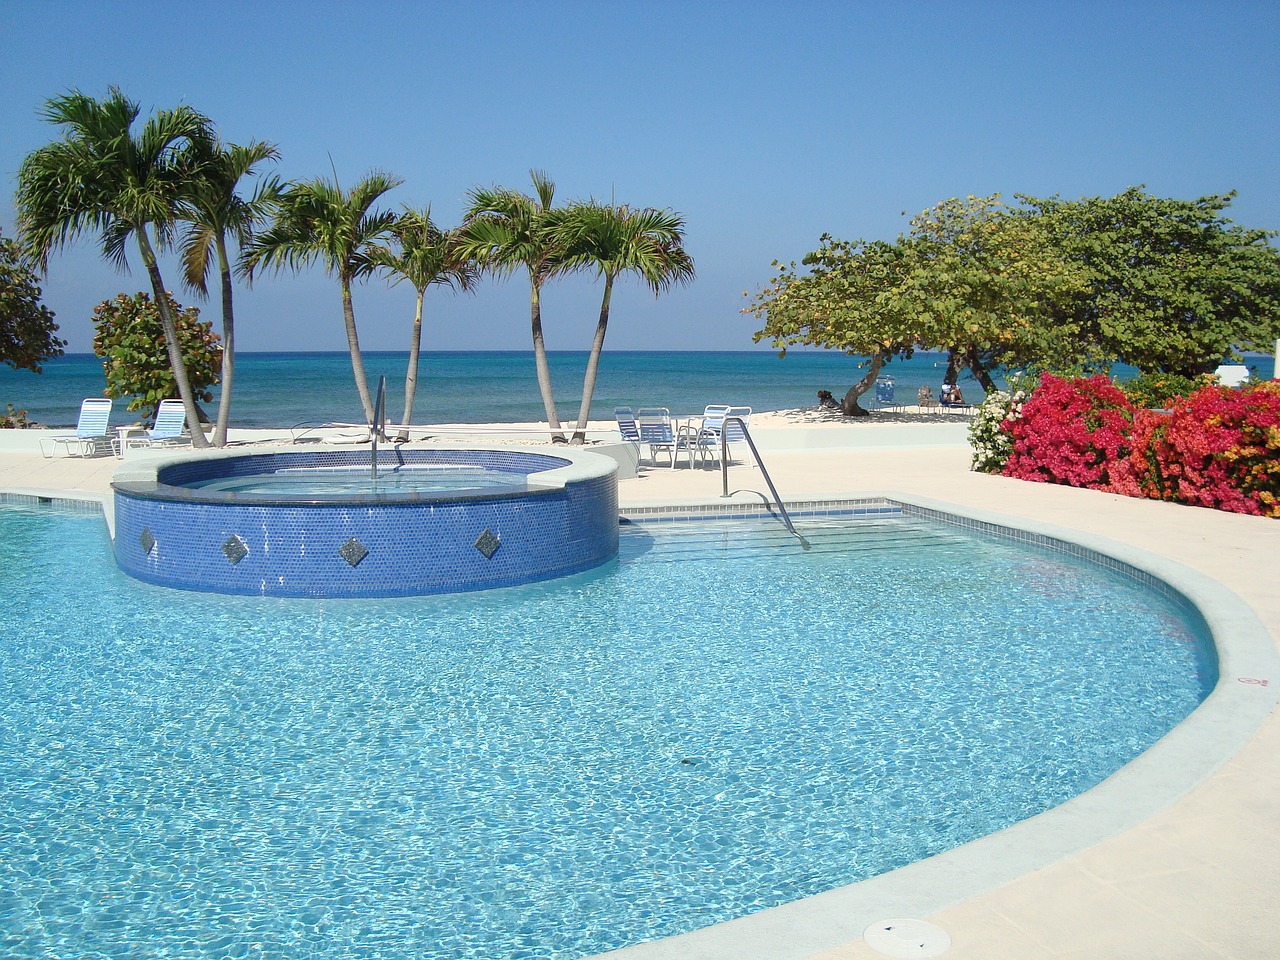 Beach Resorts With Private Pools - Escape To Caribbean Paradise